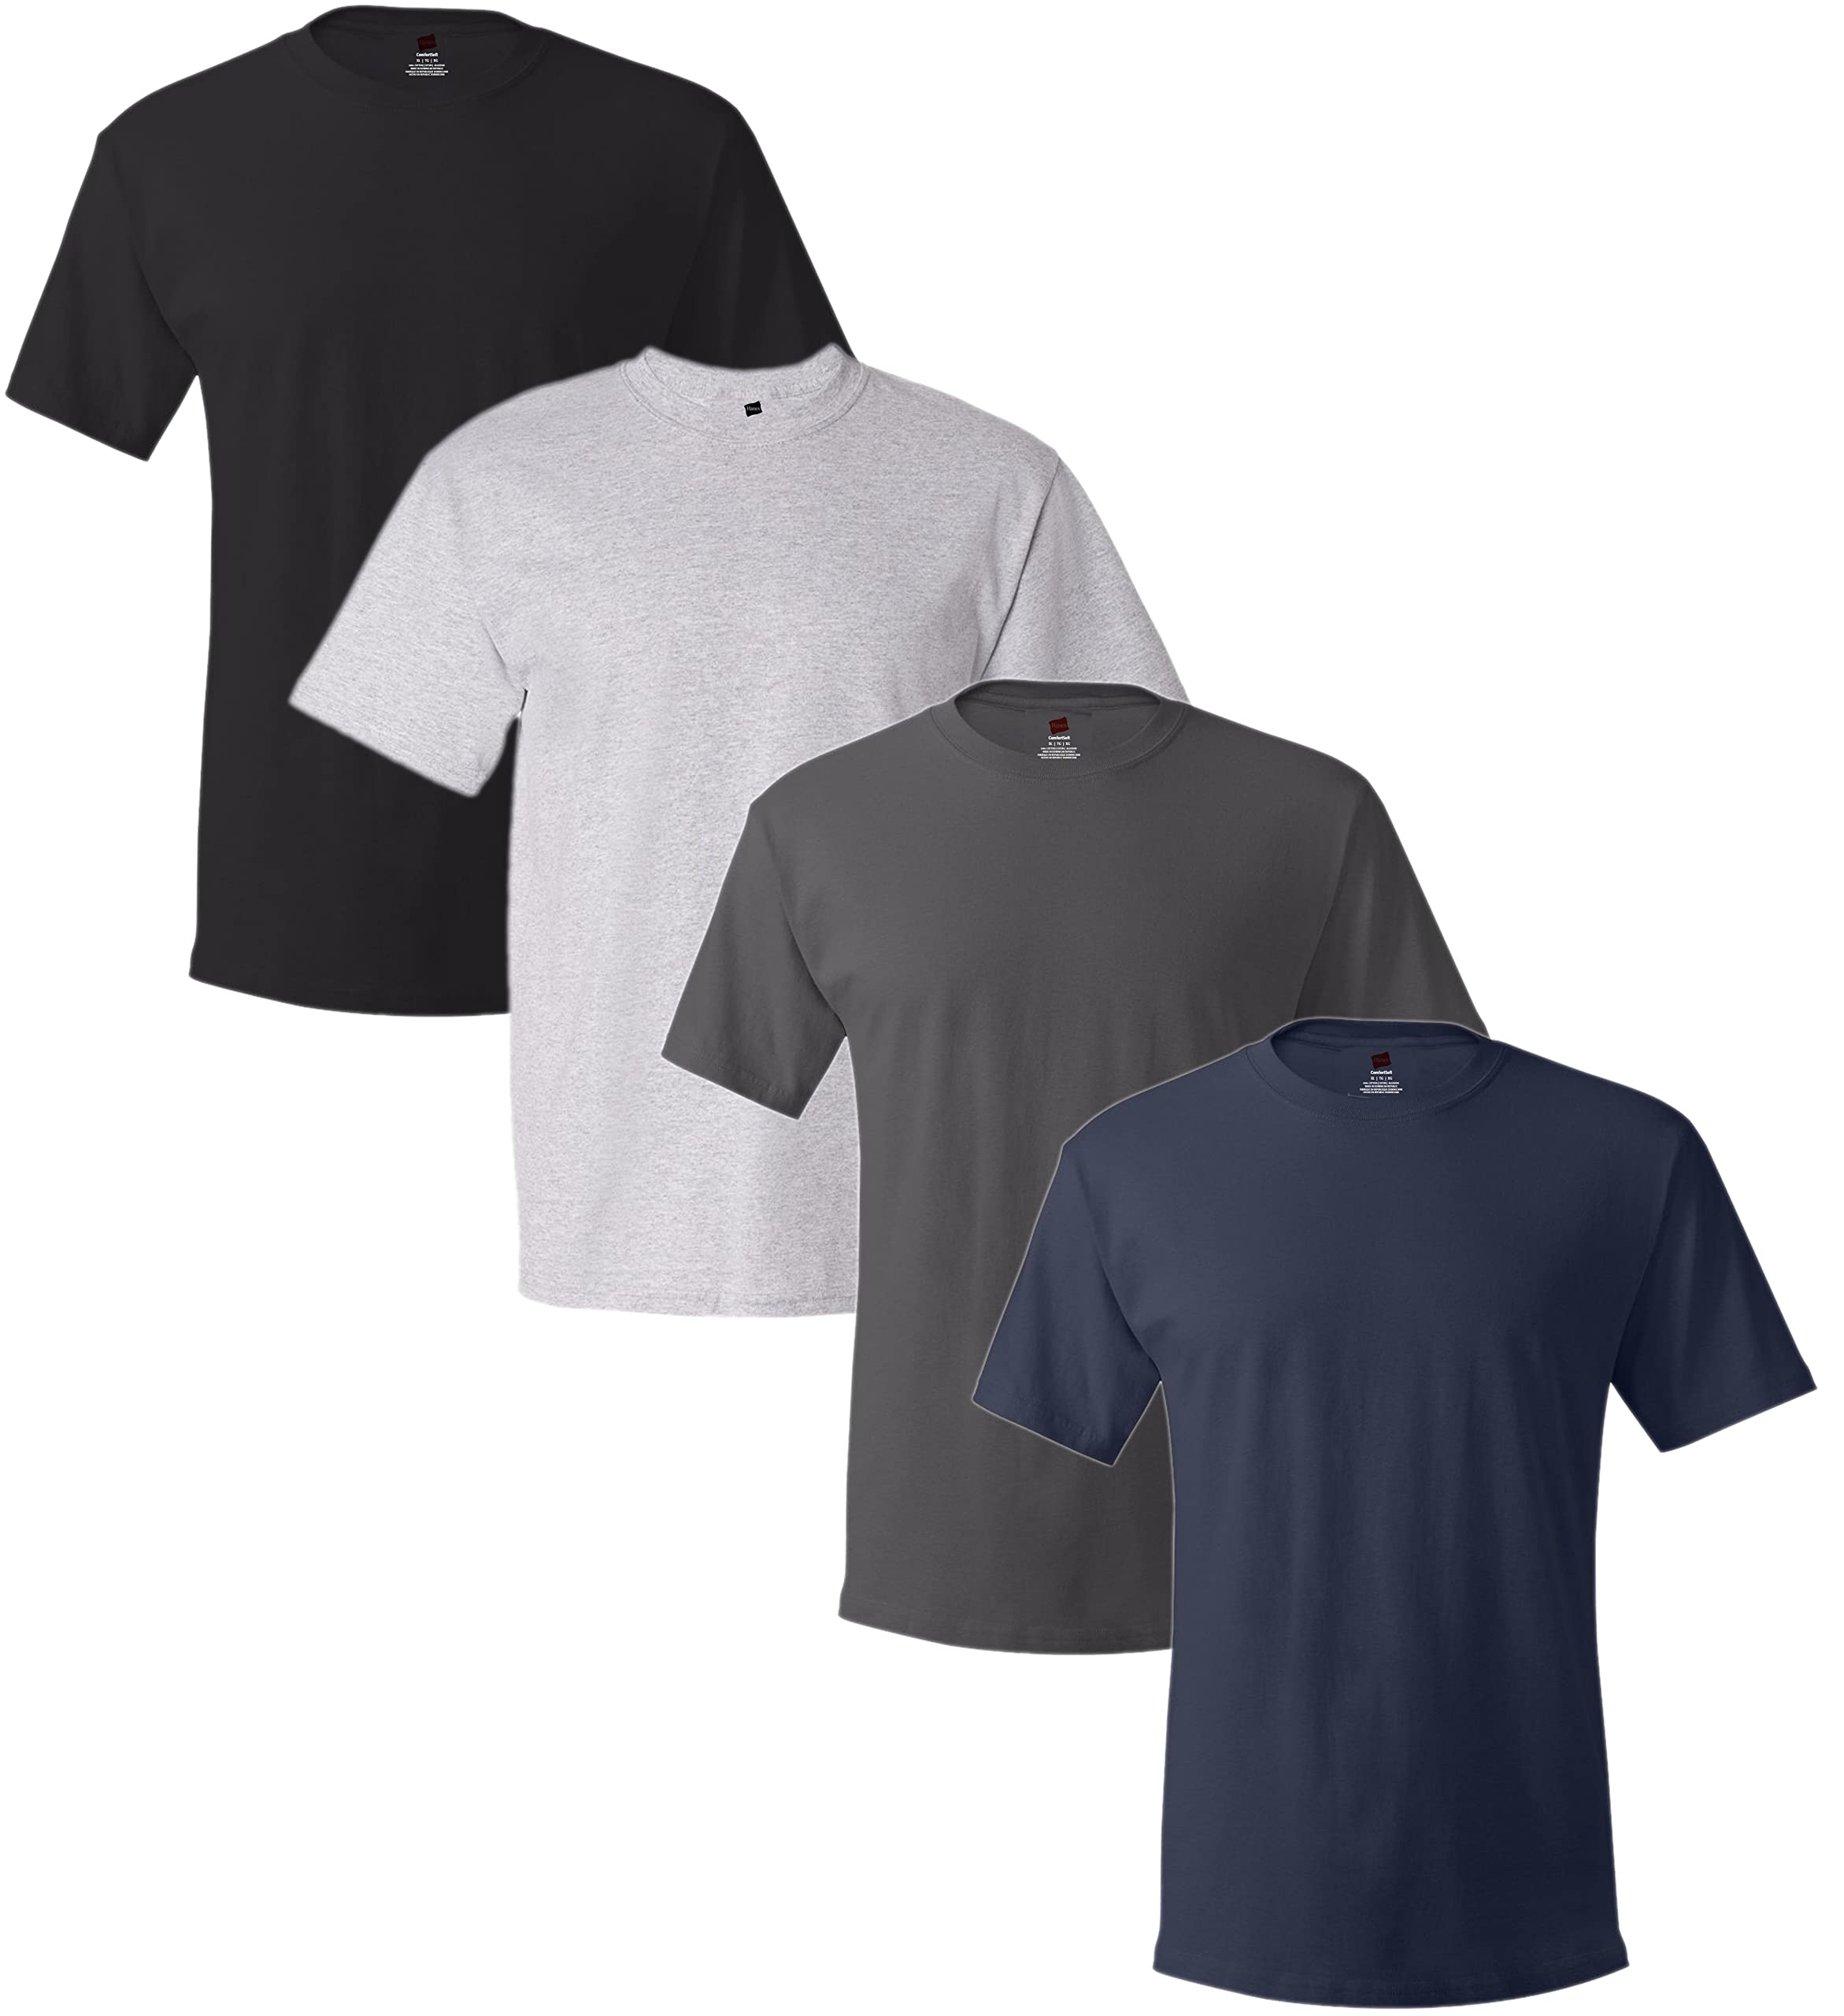 byHanes Hanes Men's ComfortSoft T-Shirt (Pack Of 4) (Assorted, X-Large)